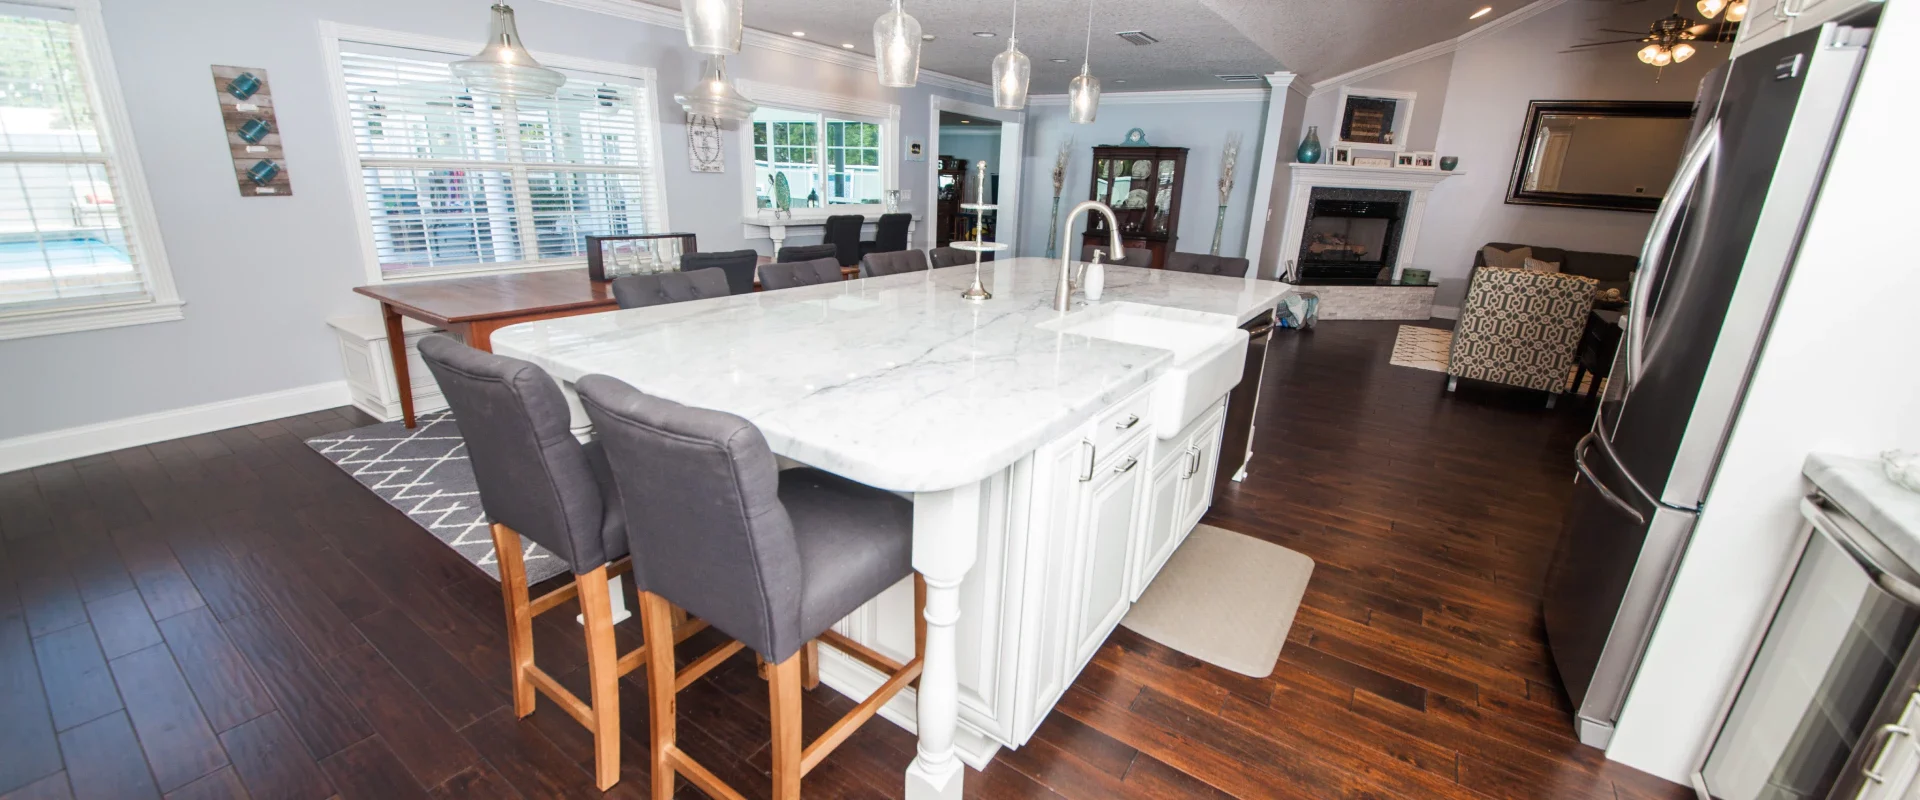 white kitchen with a platinum fridge a marbled countertop with grey wood chairs ponte vedra beach fl